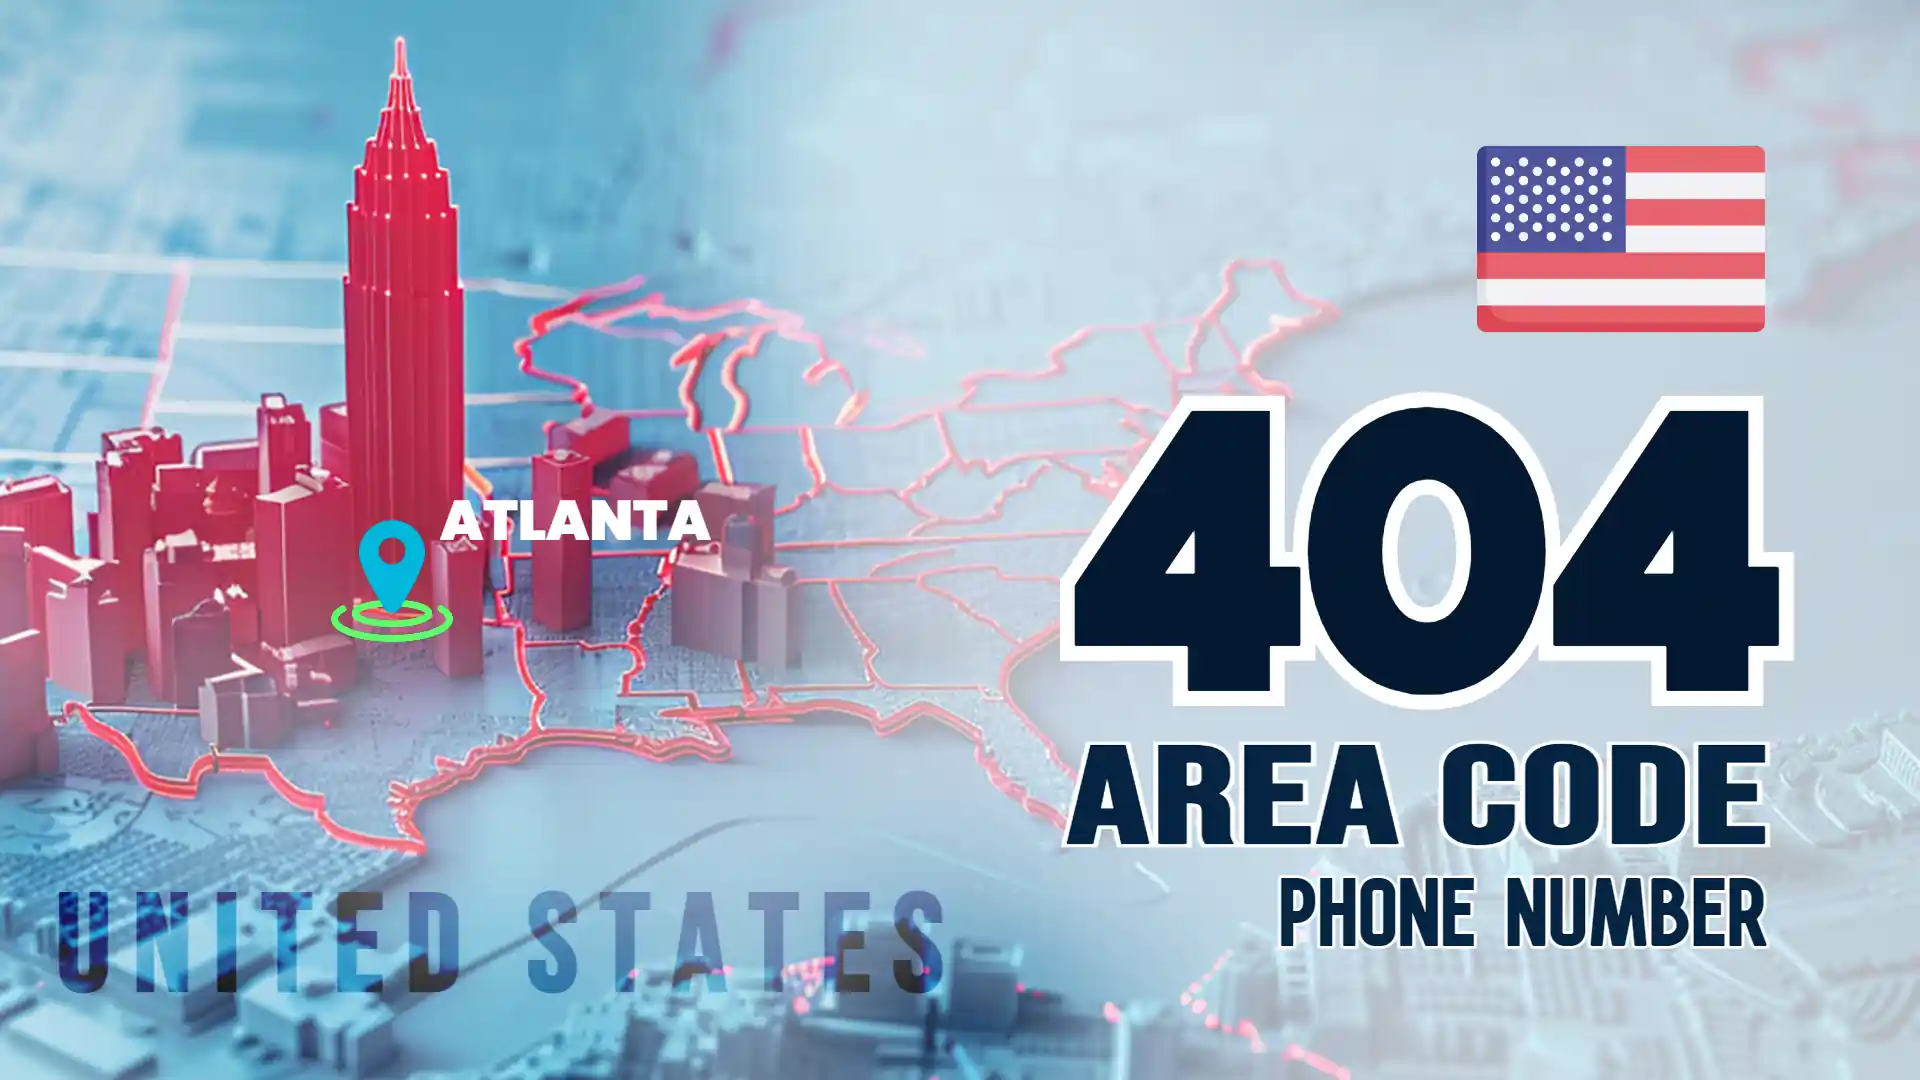 What is a 404 area code